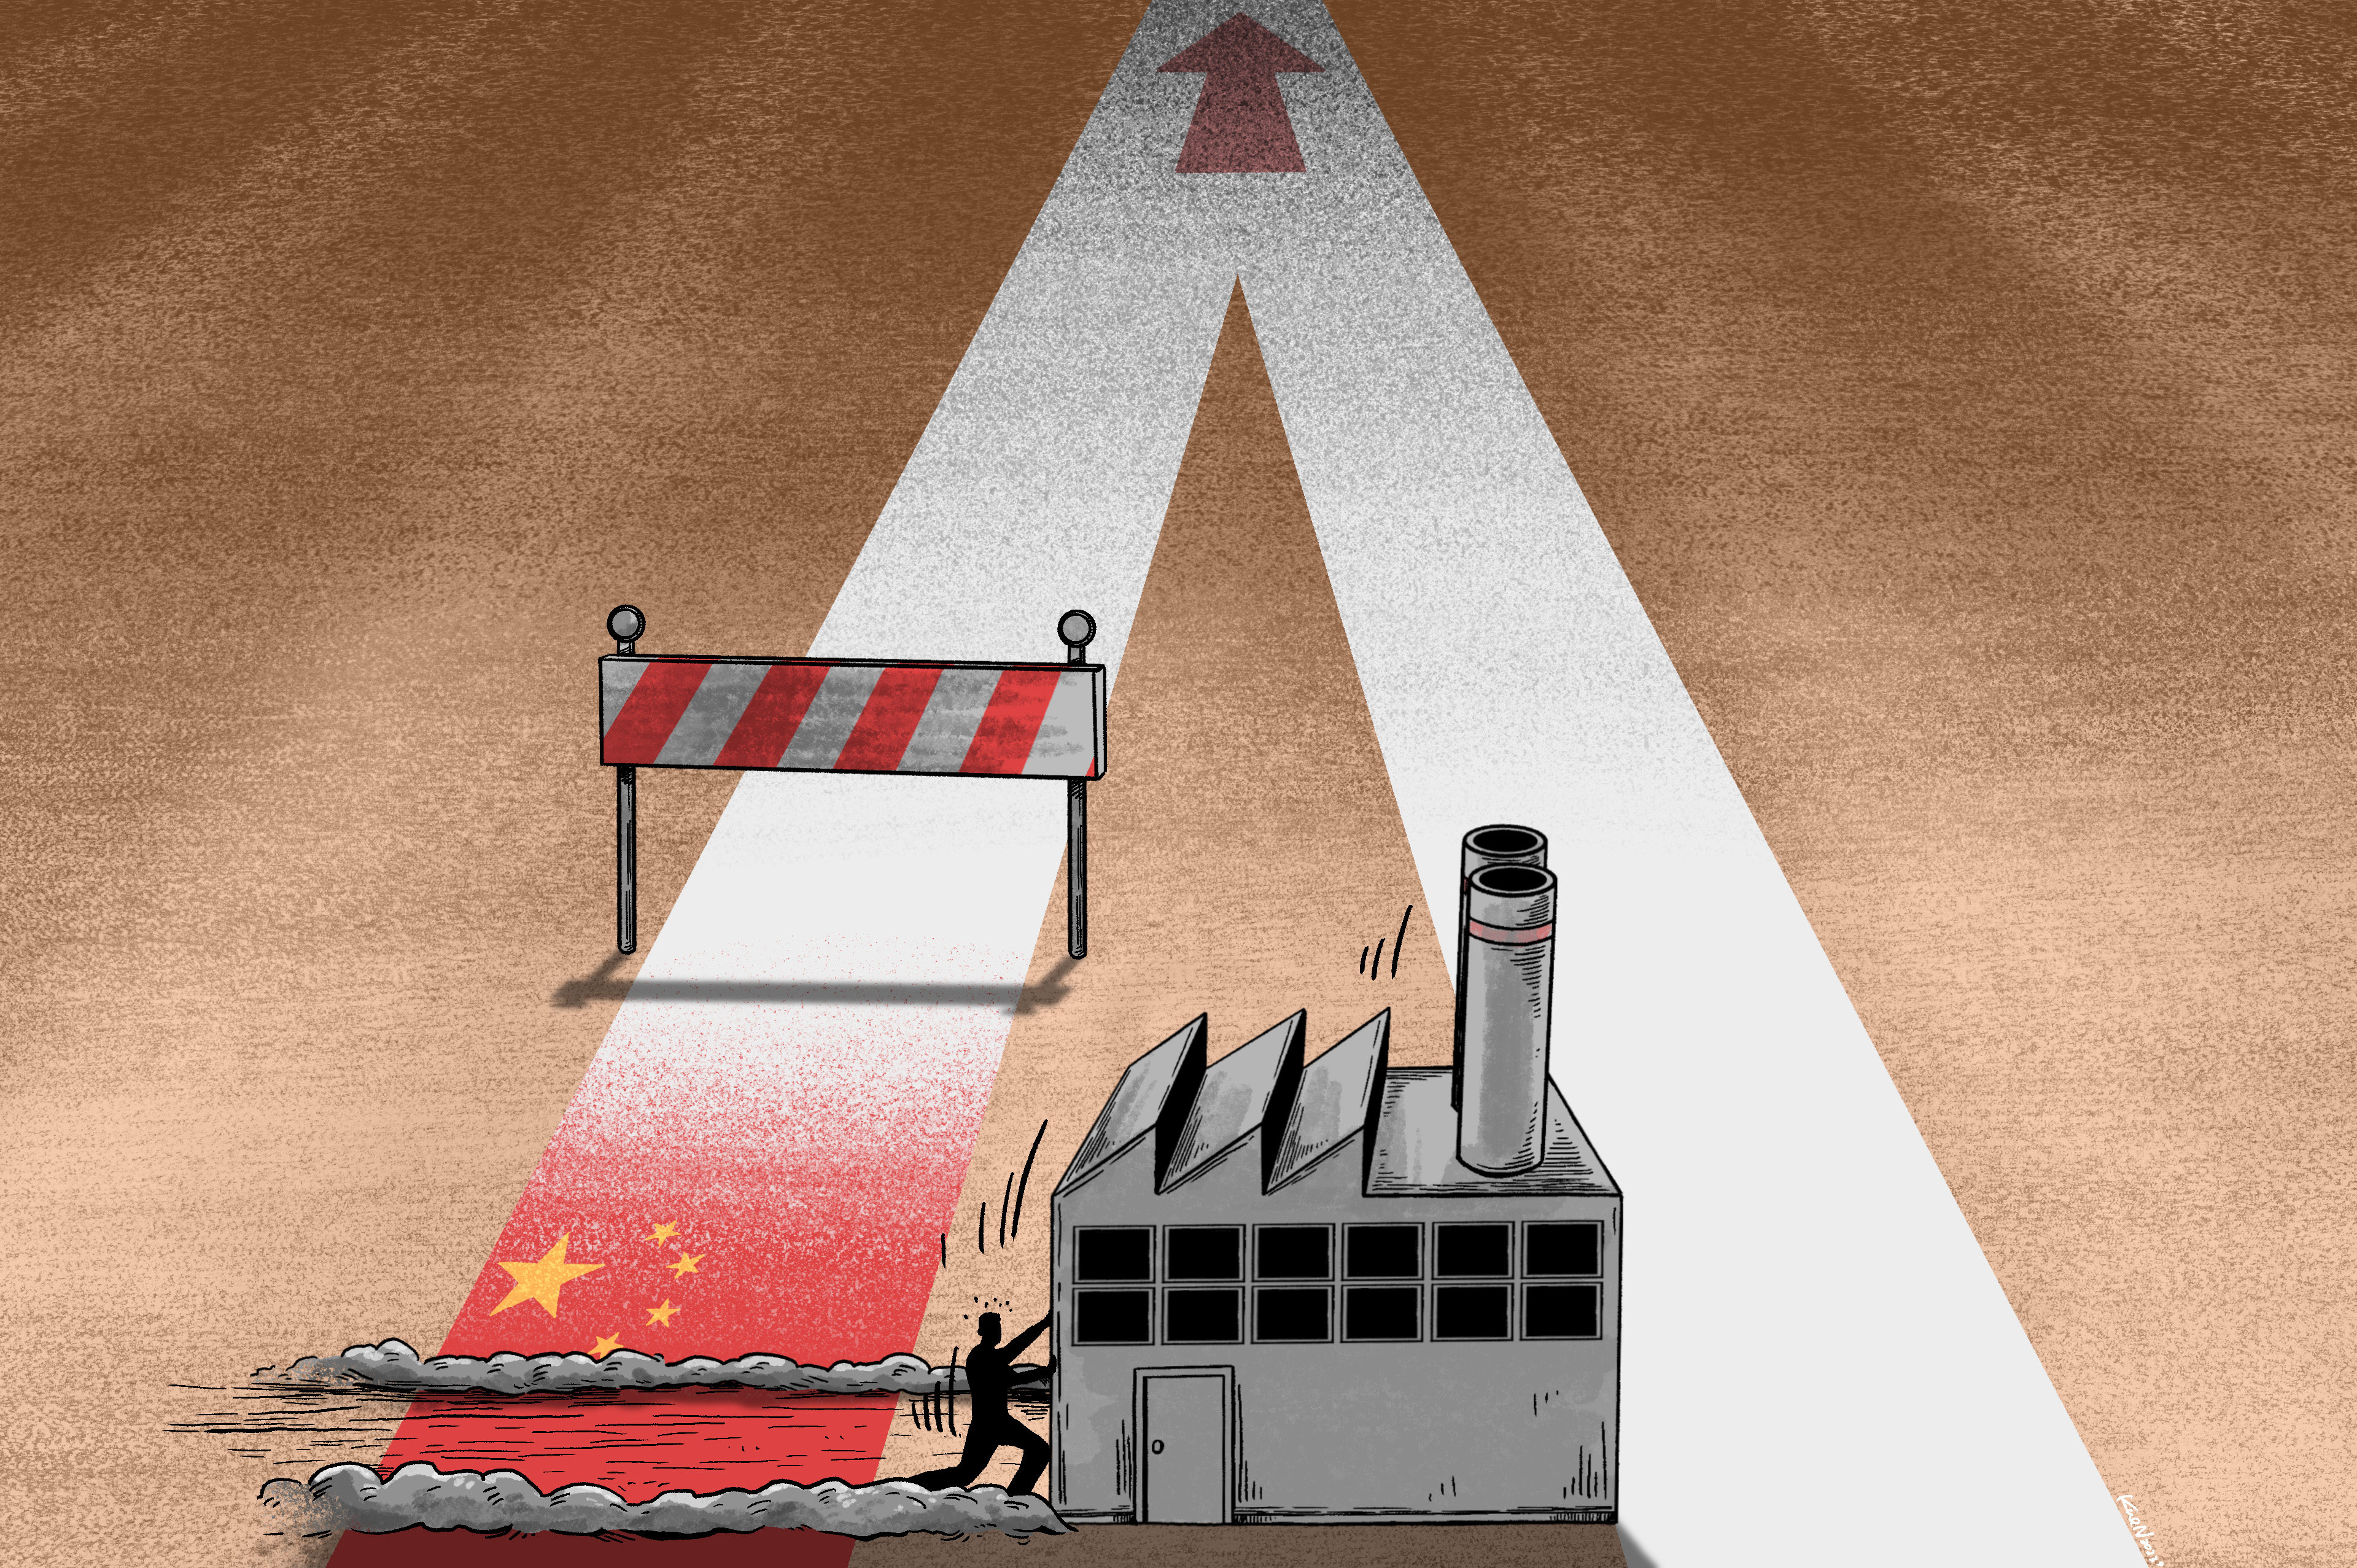 China's raids on foreign firms hurt its own interests